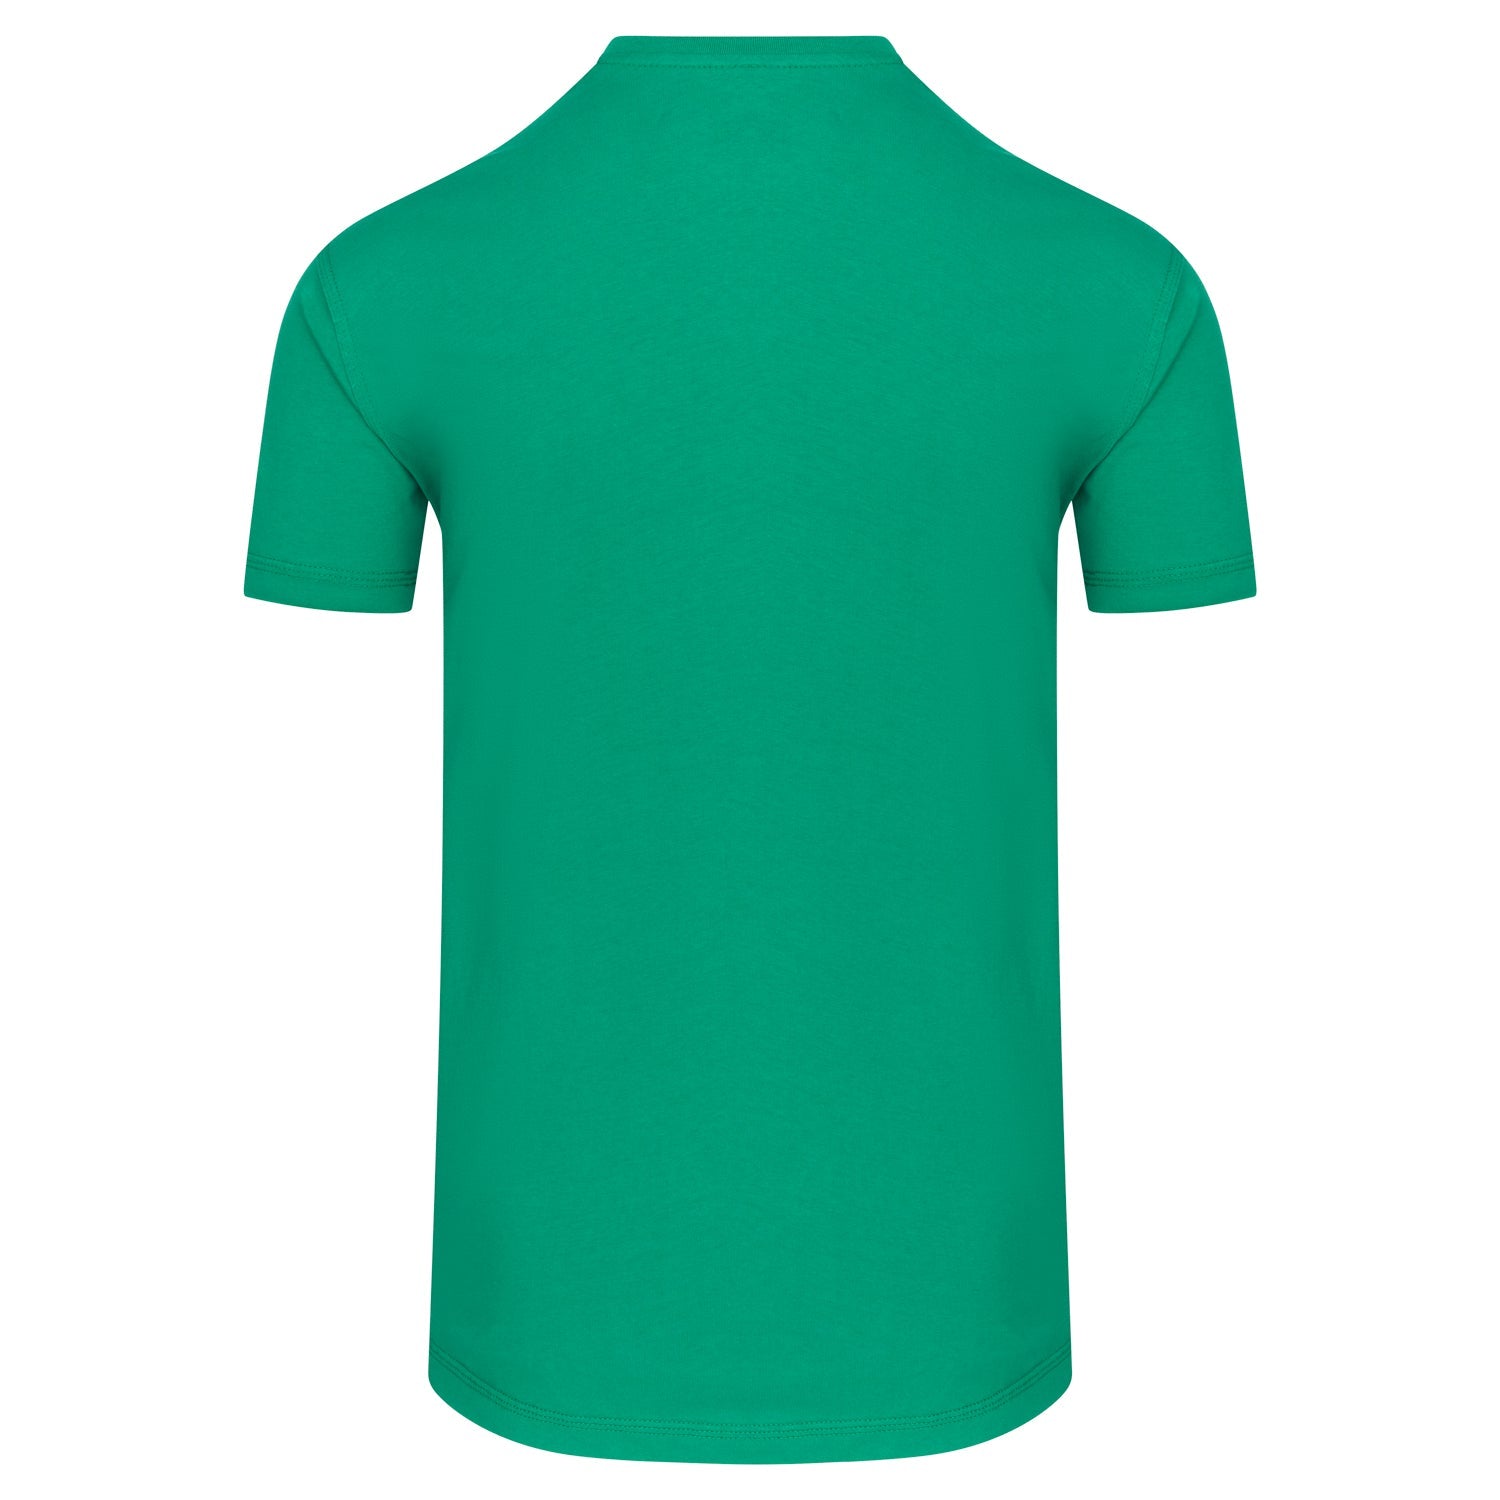 ORN Plover T-Shirt - Kelly Green